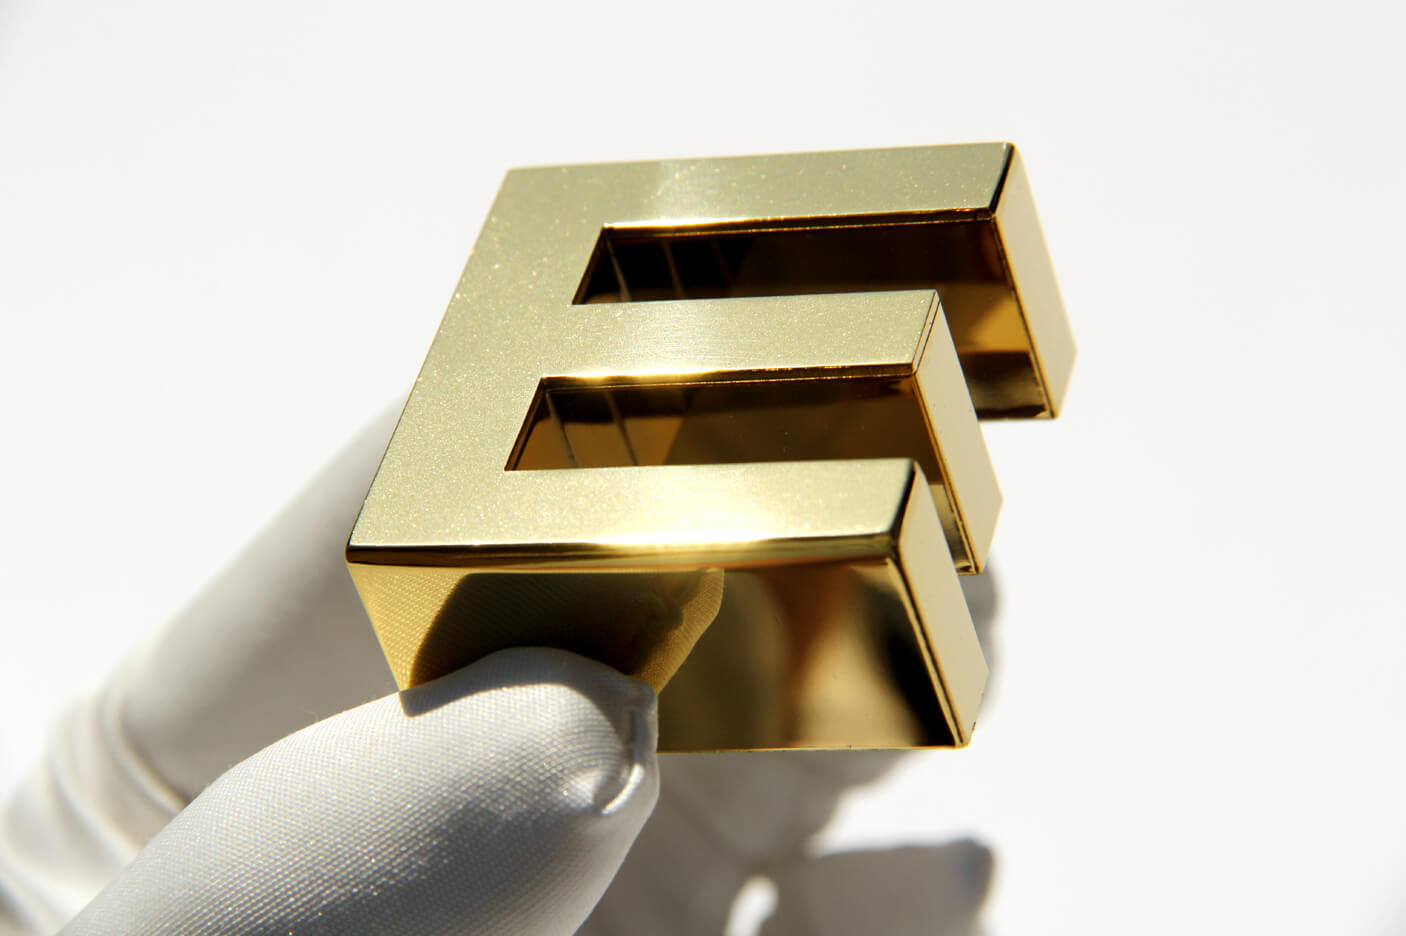 Letter E - made of stainless steel, polished in gold color